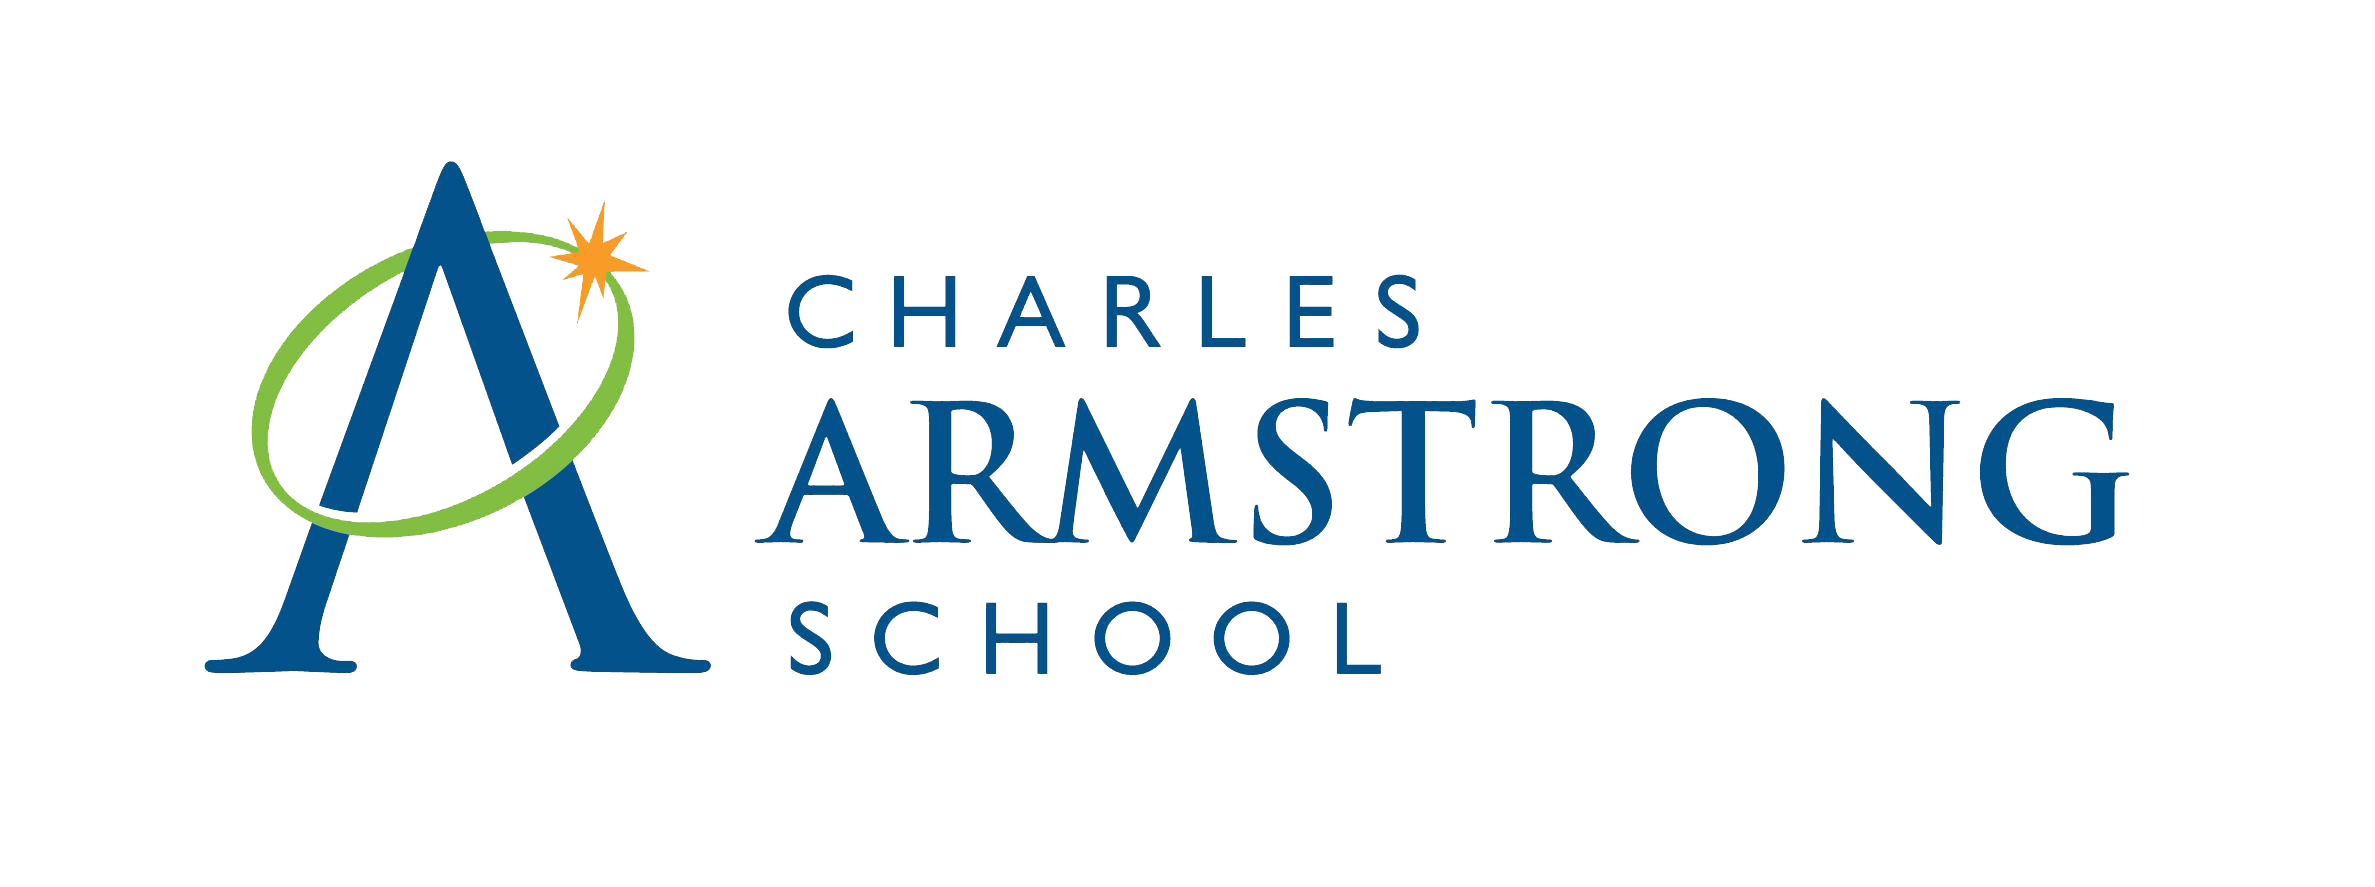 Charles Armstrong School logo